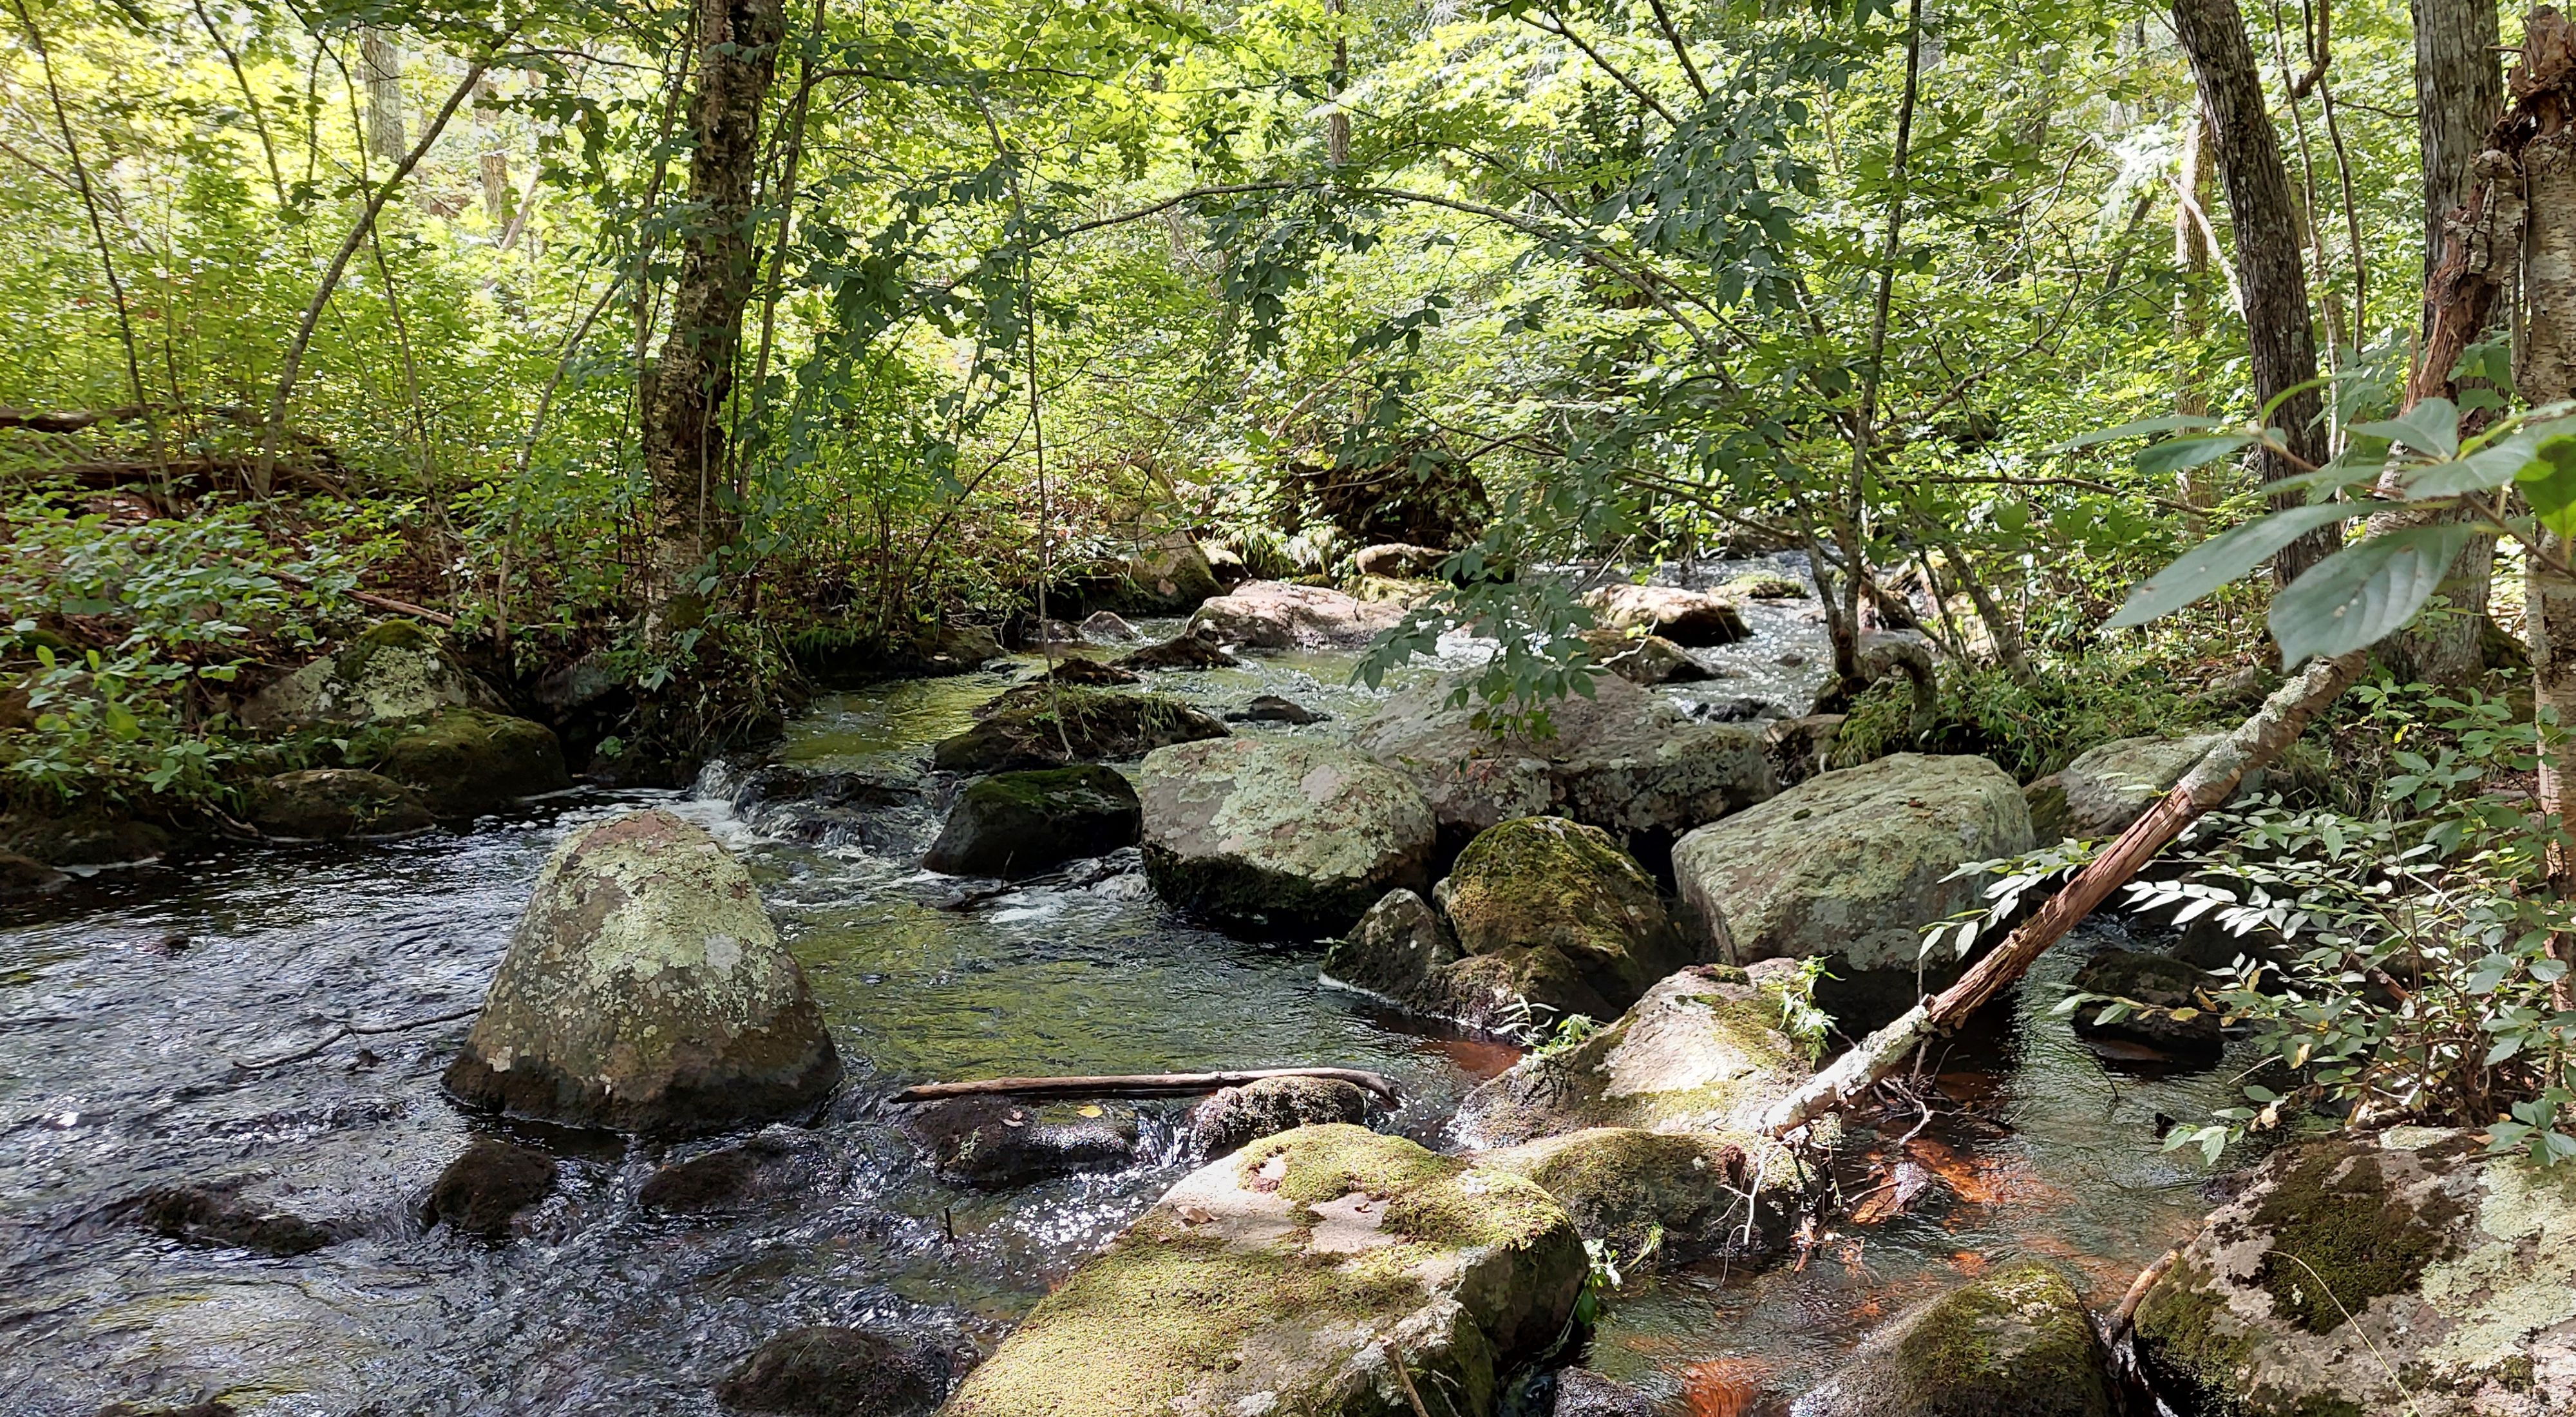 A small river with large, exposed boulders flows through the leafy understory on a sunny summer day.